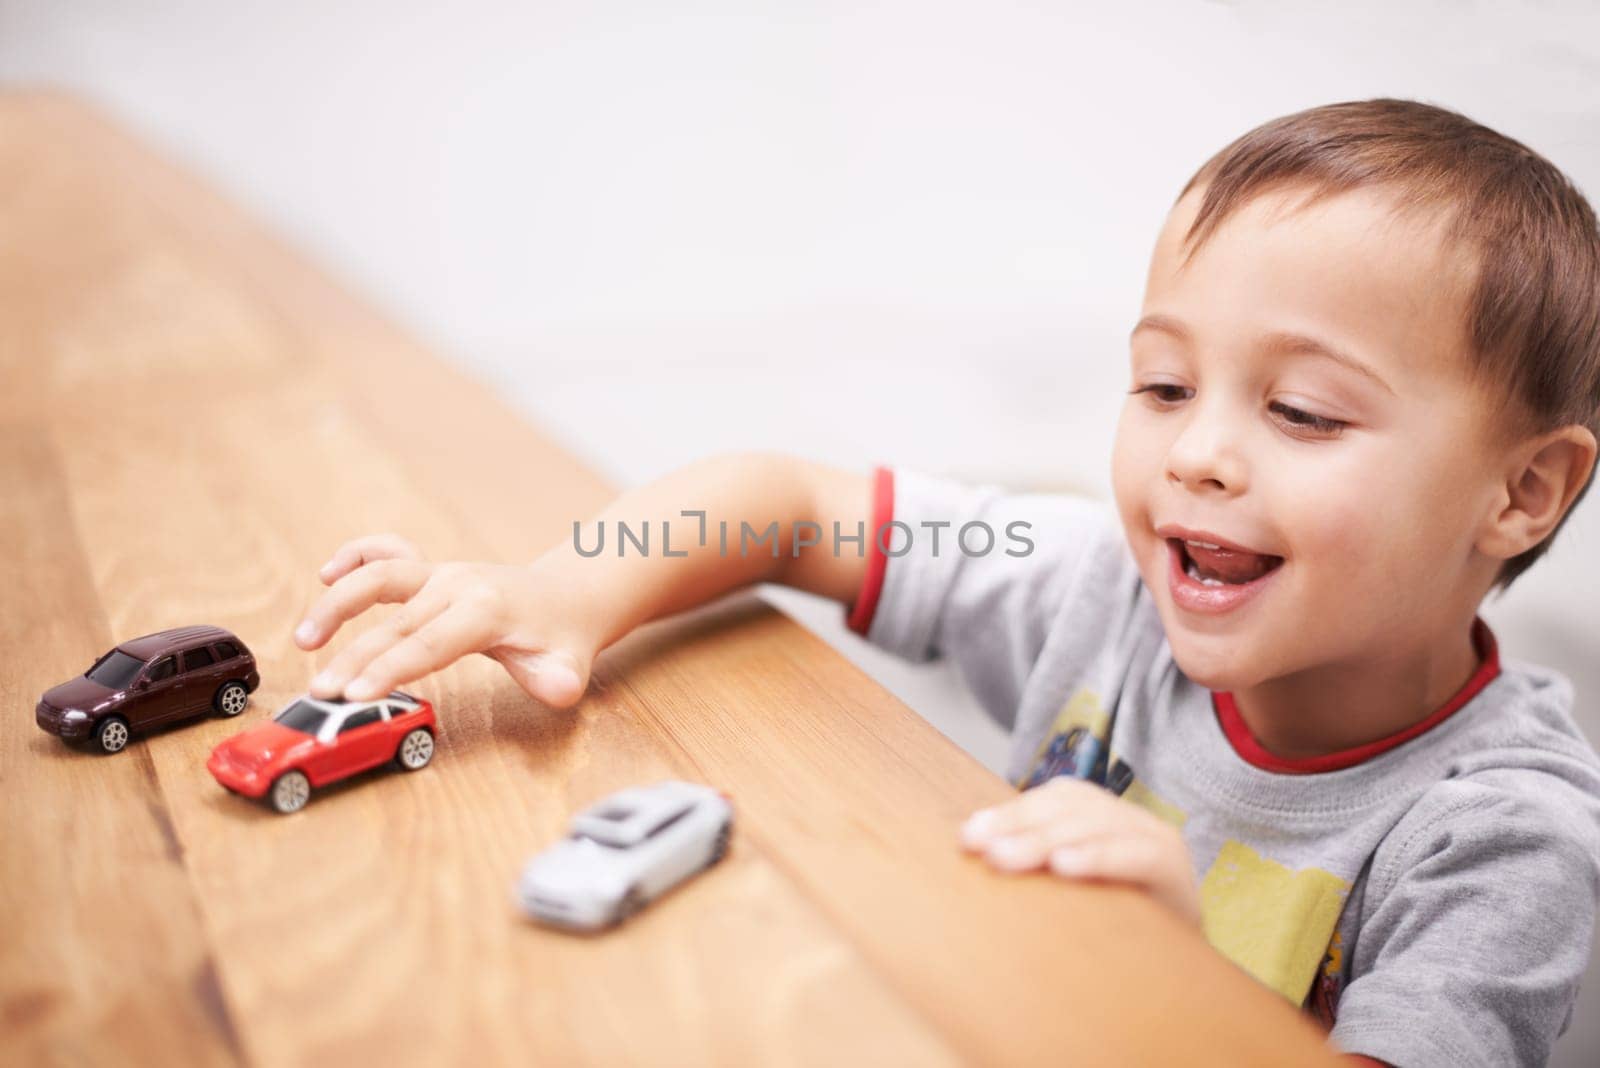 Cars, toys and boy kid by table playing for learning, development and fun at modern home. Cute, sweet and young child enjoying a game with plastic vehicles by wood for childhood hobby at house. by YuriArcurs